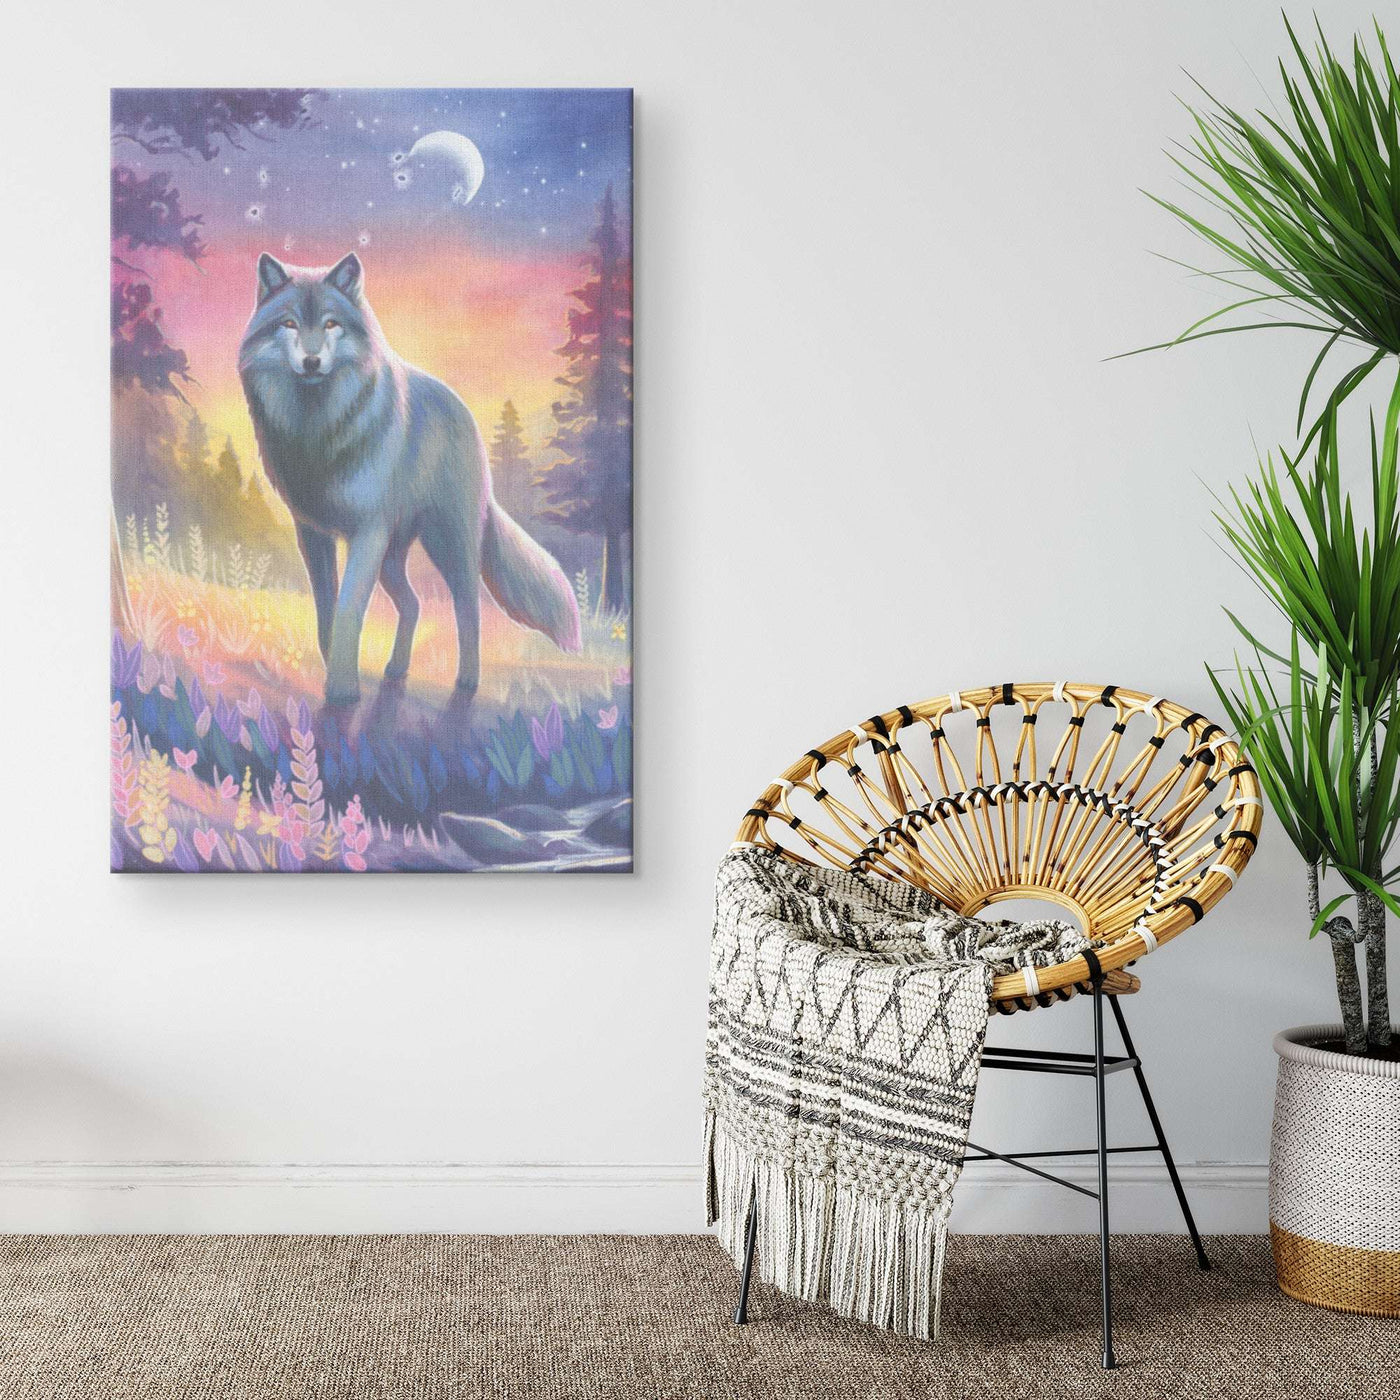 A Canvas Wolf Art Print of a wolf in a mystical forest hangs on a wall beside a wicker chair with a decorative throw.